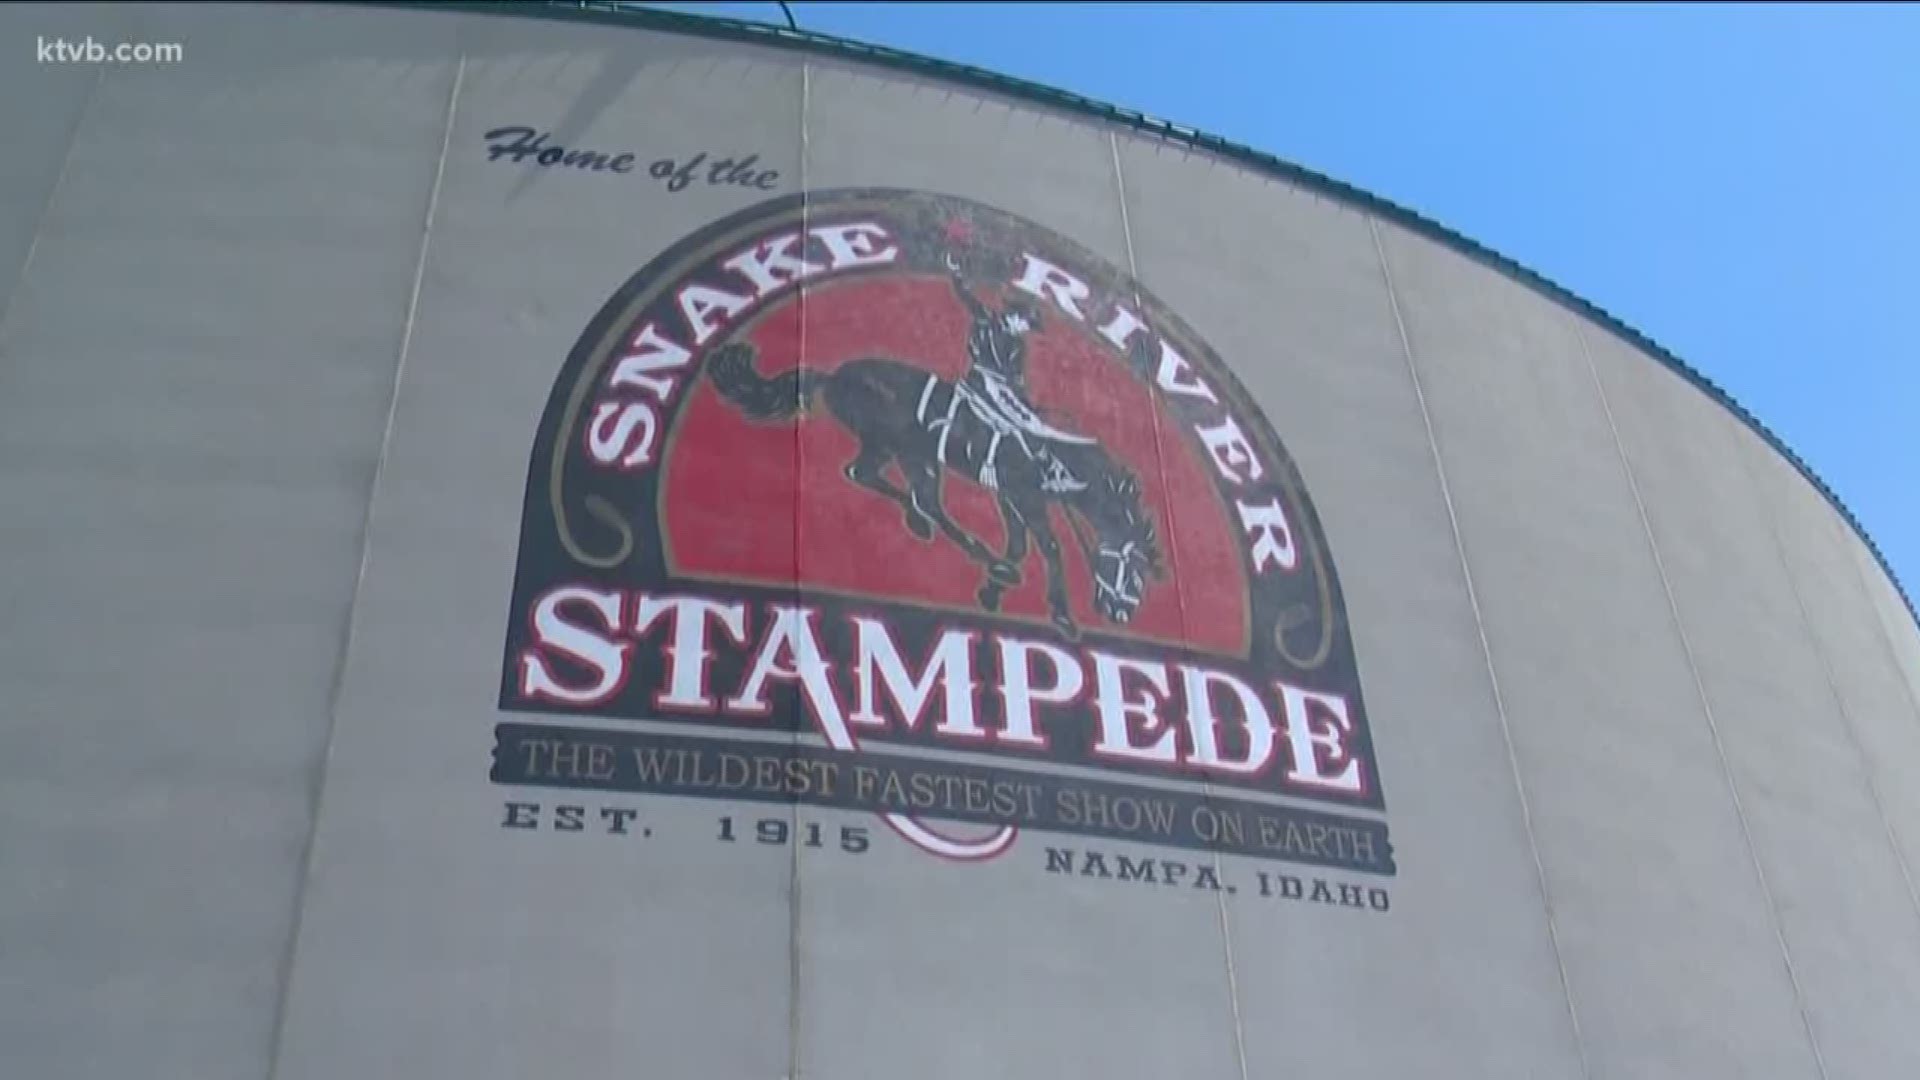 More than 700 competitors will vie for $445,000 in winnings, one of the largest purses put up for a PRCA rodeo event.